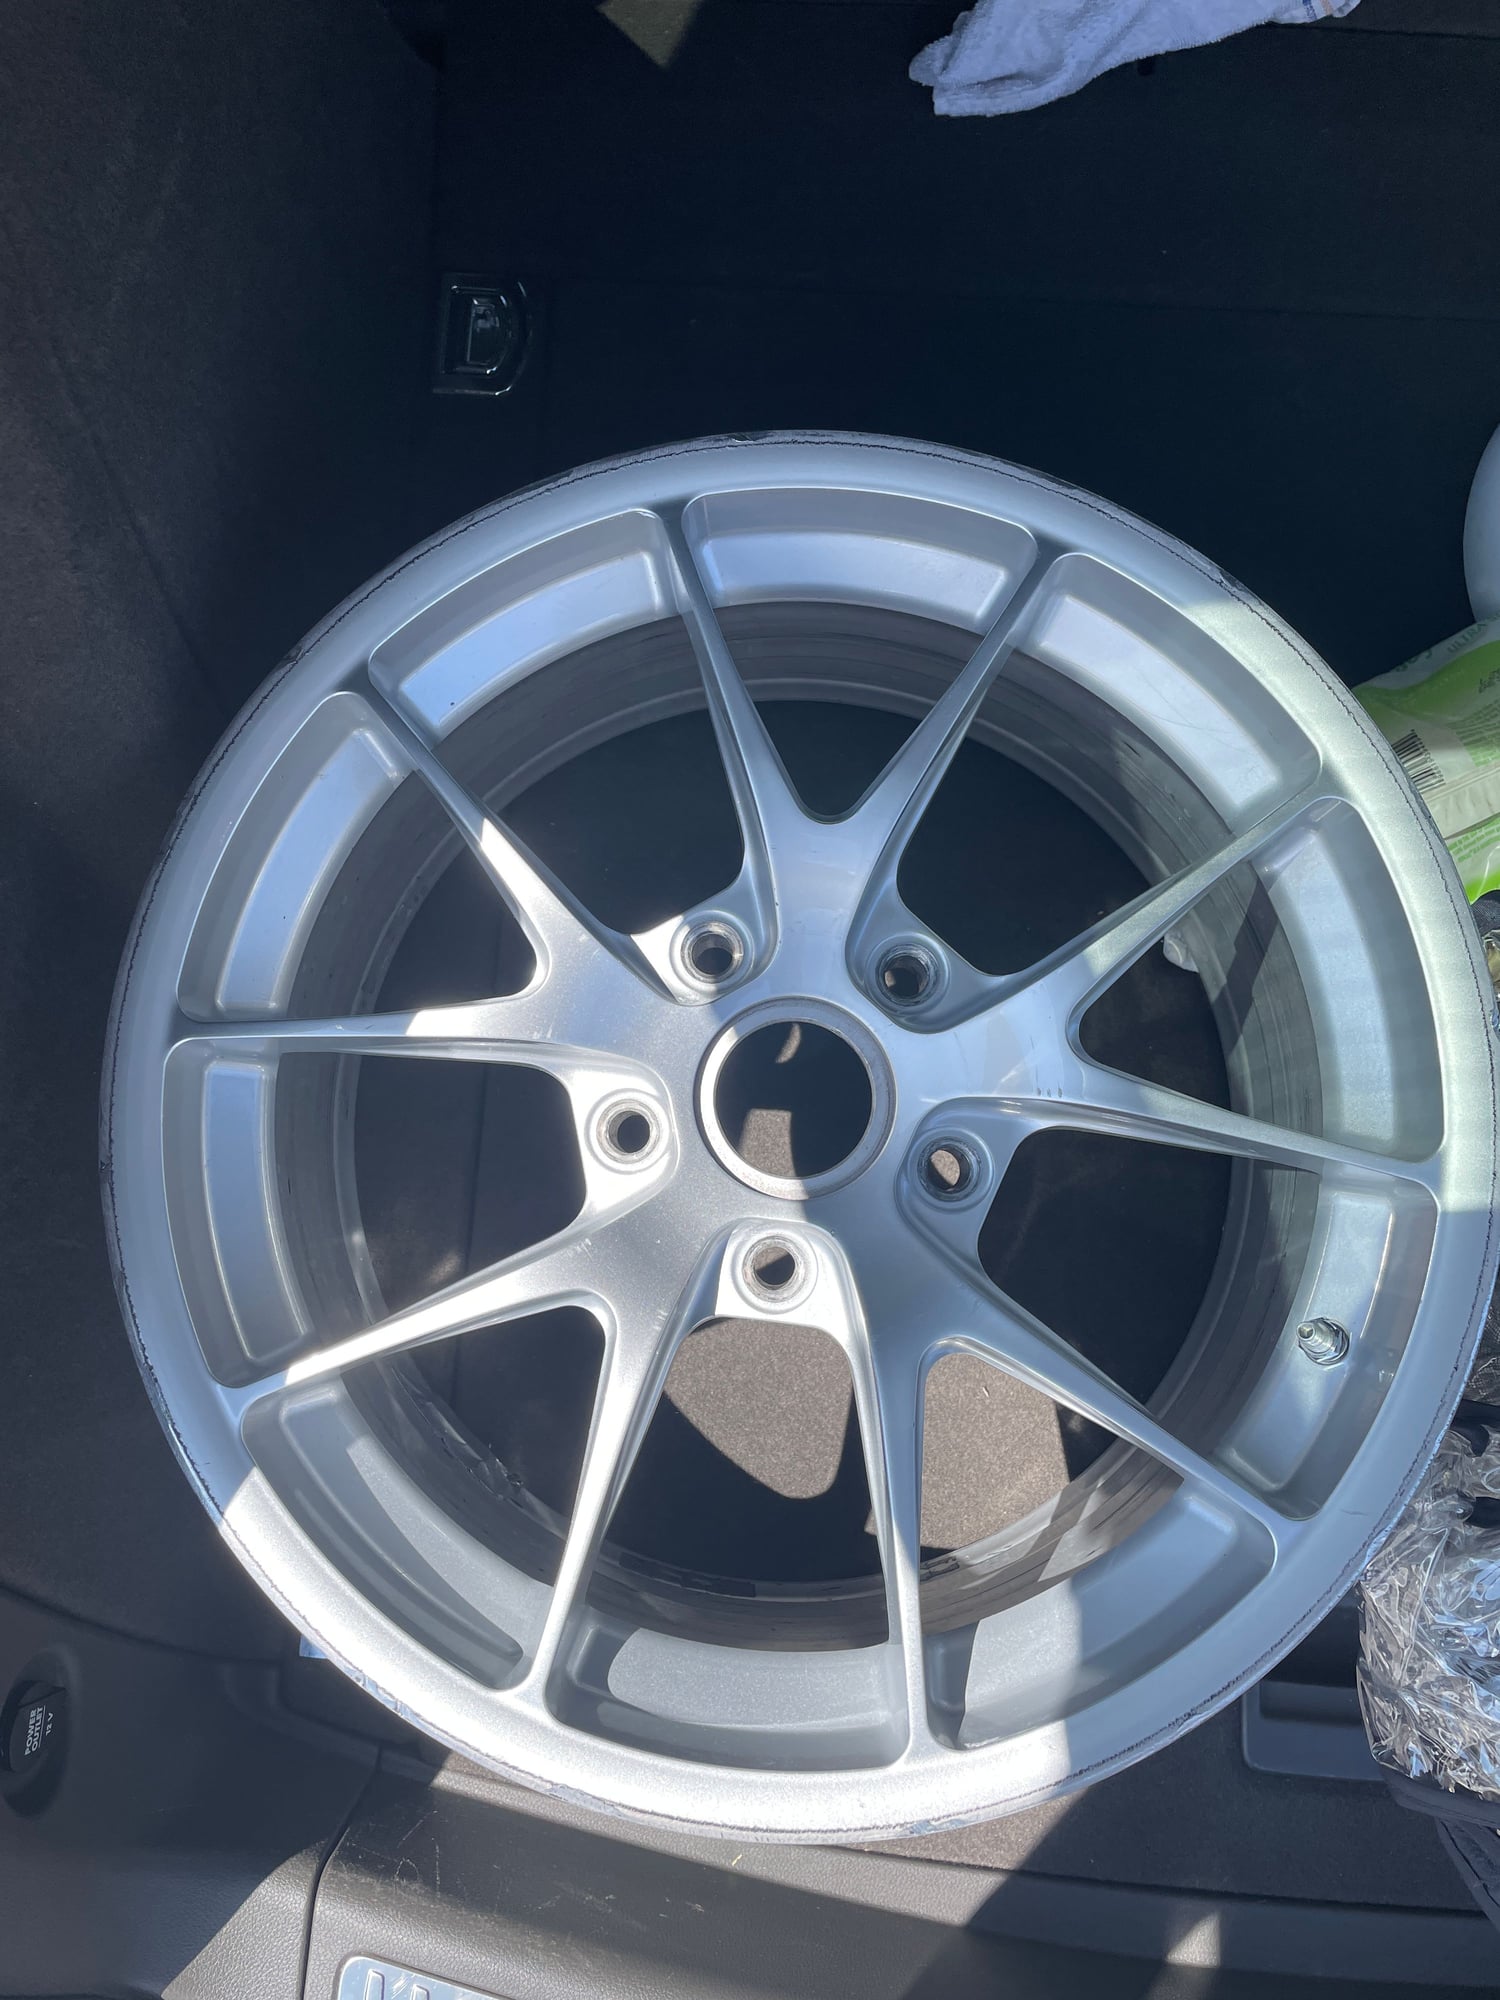 Wheels and Tires/Axles - FS: GT4 Clubsport wheel set - Used - 2016 to 2021 Porsche Cayman GT4 - Los Angeles, CA 90065, United States